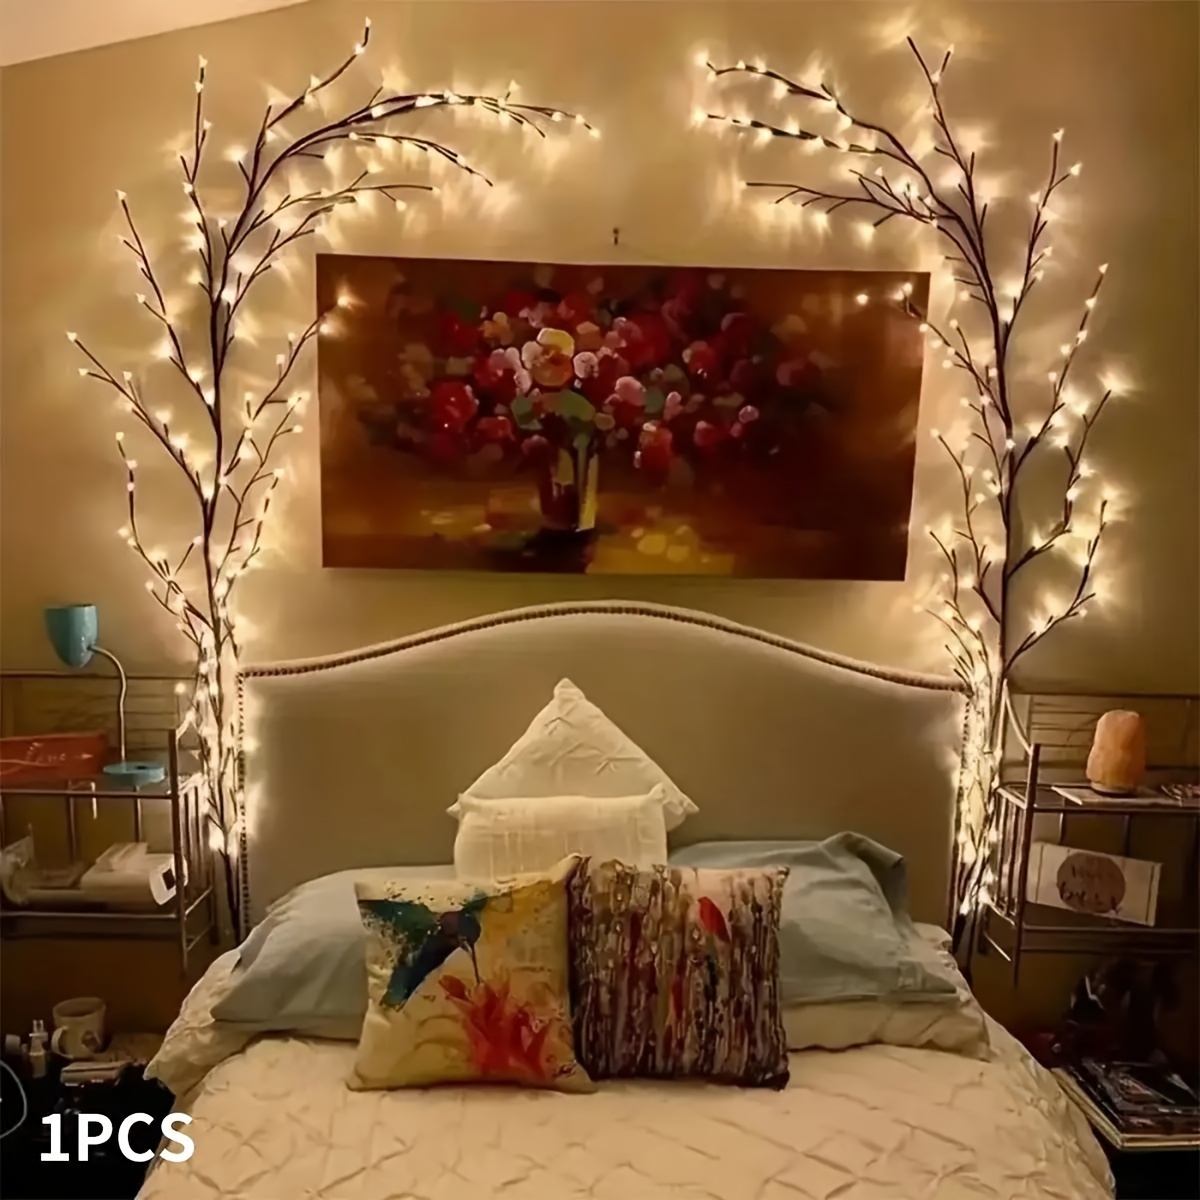 

1pc 144 Led Branch Cane Light Is Suitable For Outdoor Decoration Of Living Room Bedroom New Year's Day Valentine's Day Easter Thanksgiving And Other Holiday Party Decoration